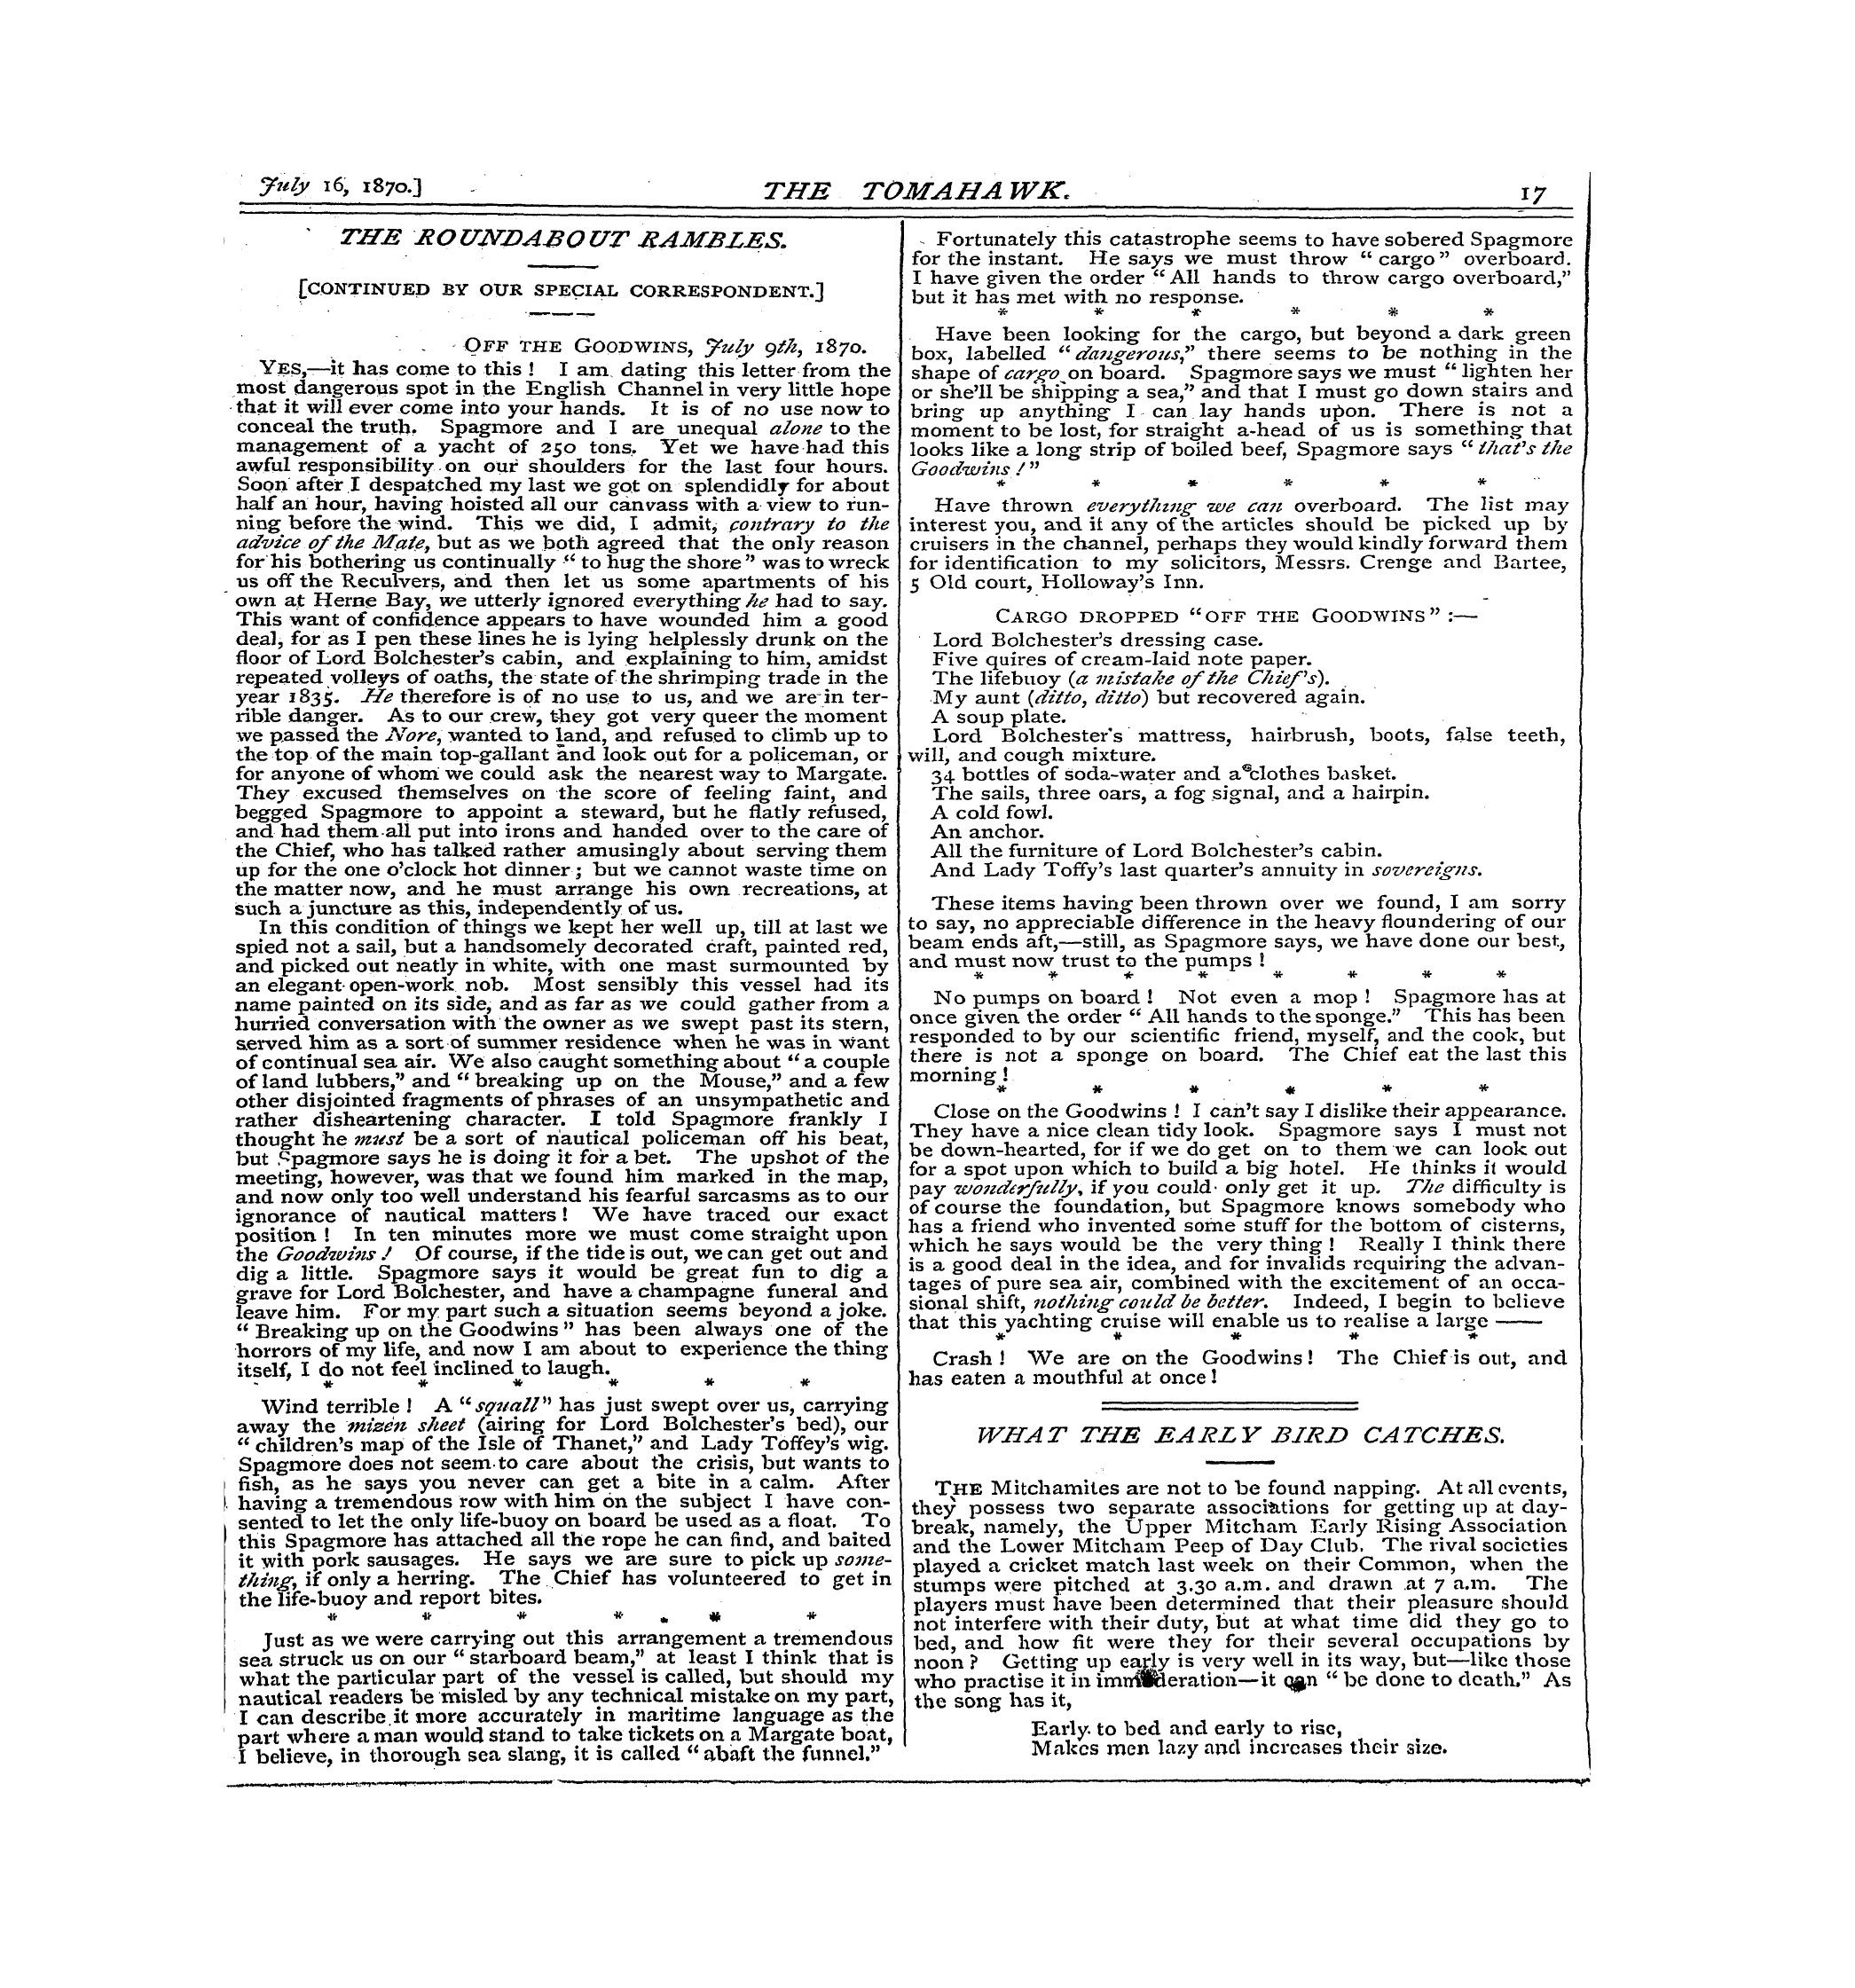 Tomahawk (1867-1870): jS F Y, 1st edition - The Moujstjdab Out \Rambles.